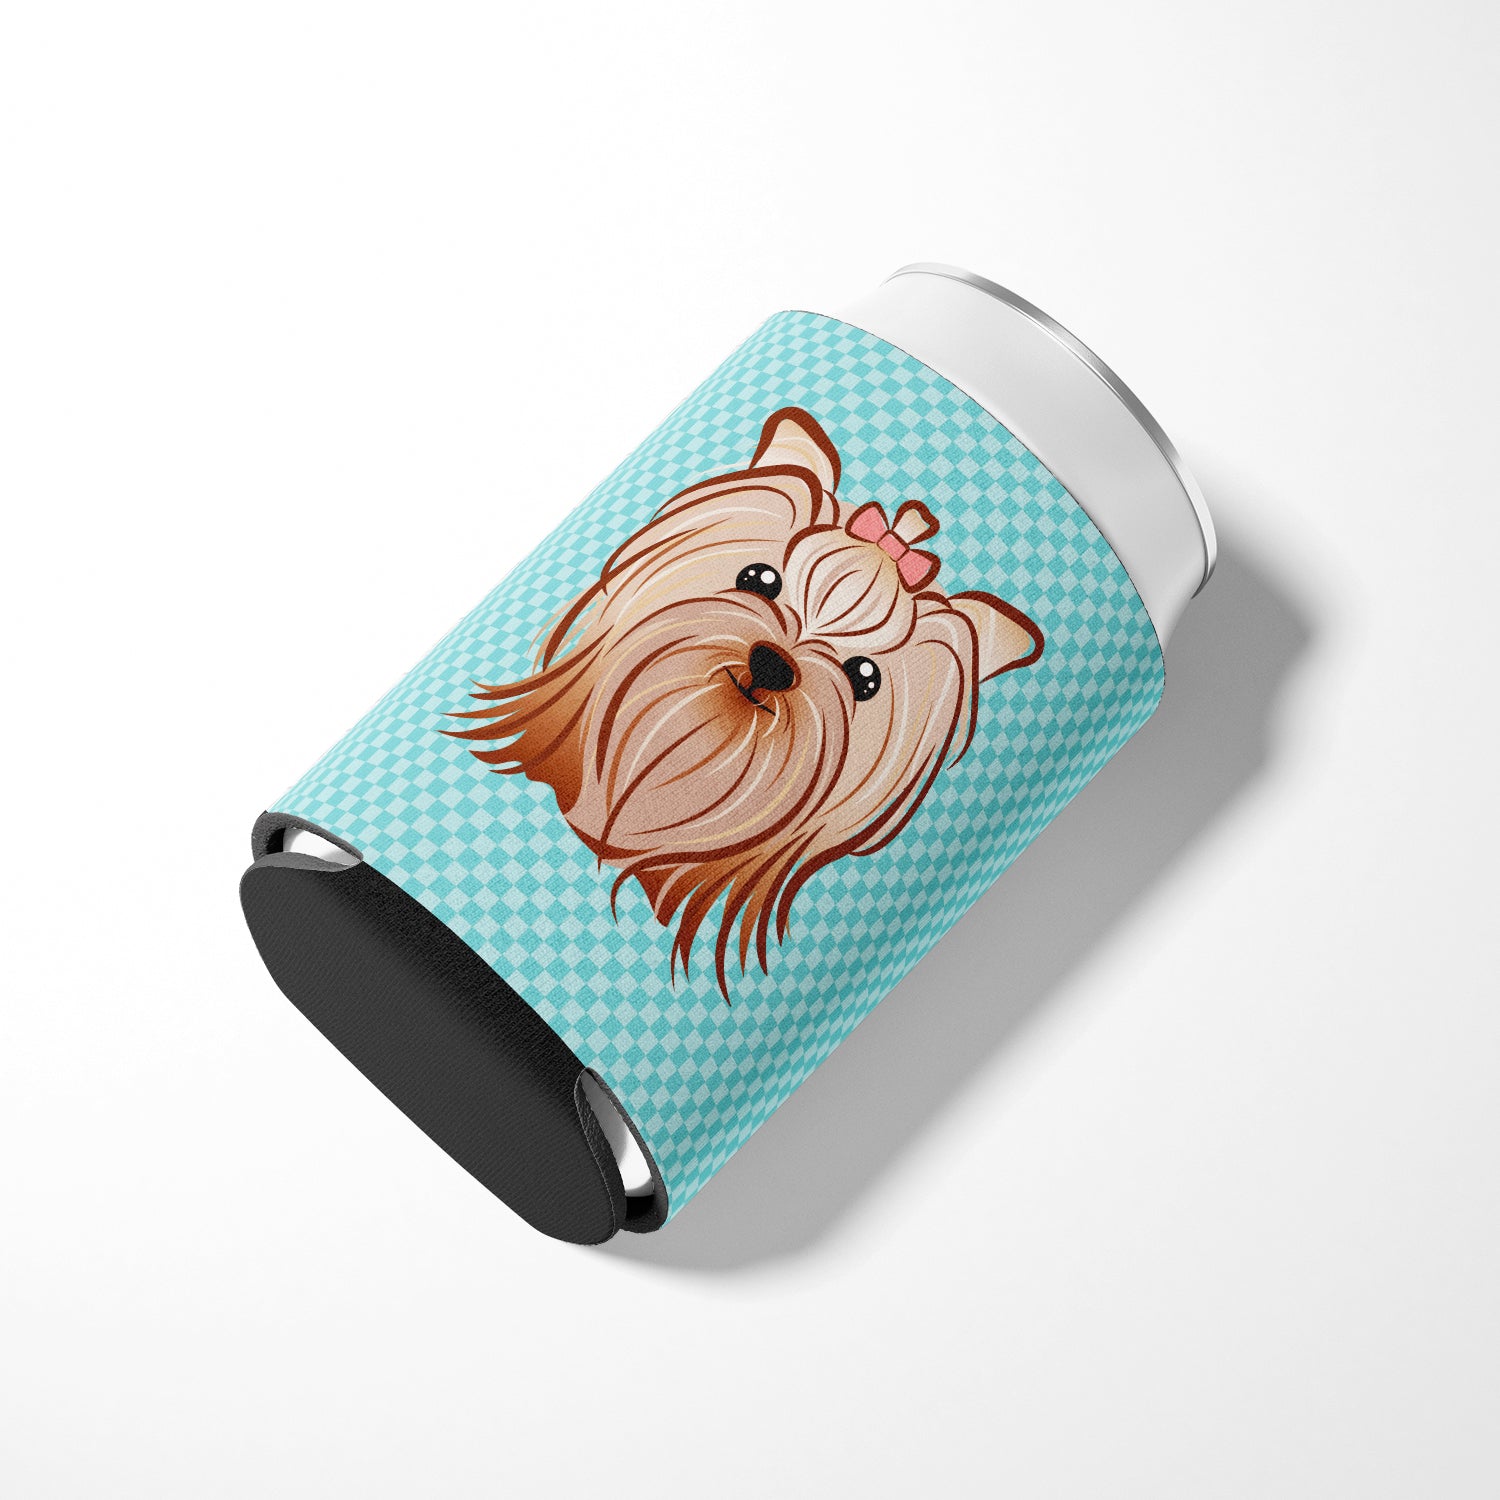 Checkerboard Blue Yorkie Yorkshire Terrier Can or Bottle Hugger BB1142CC.